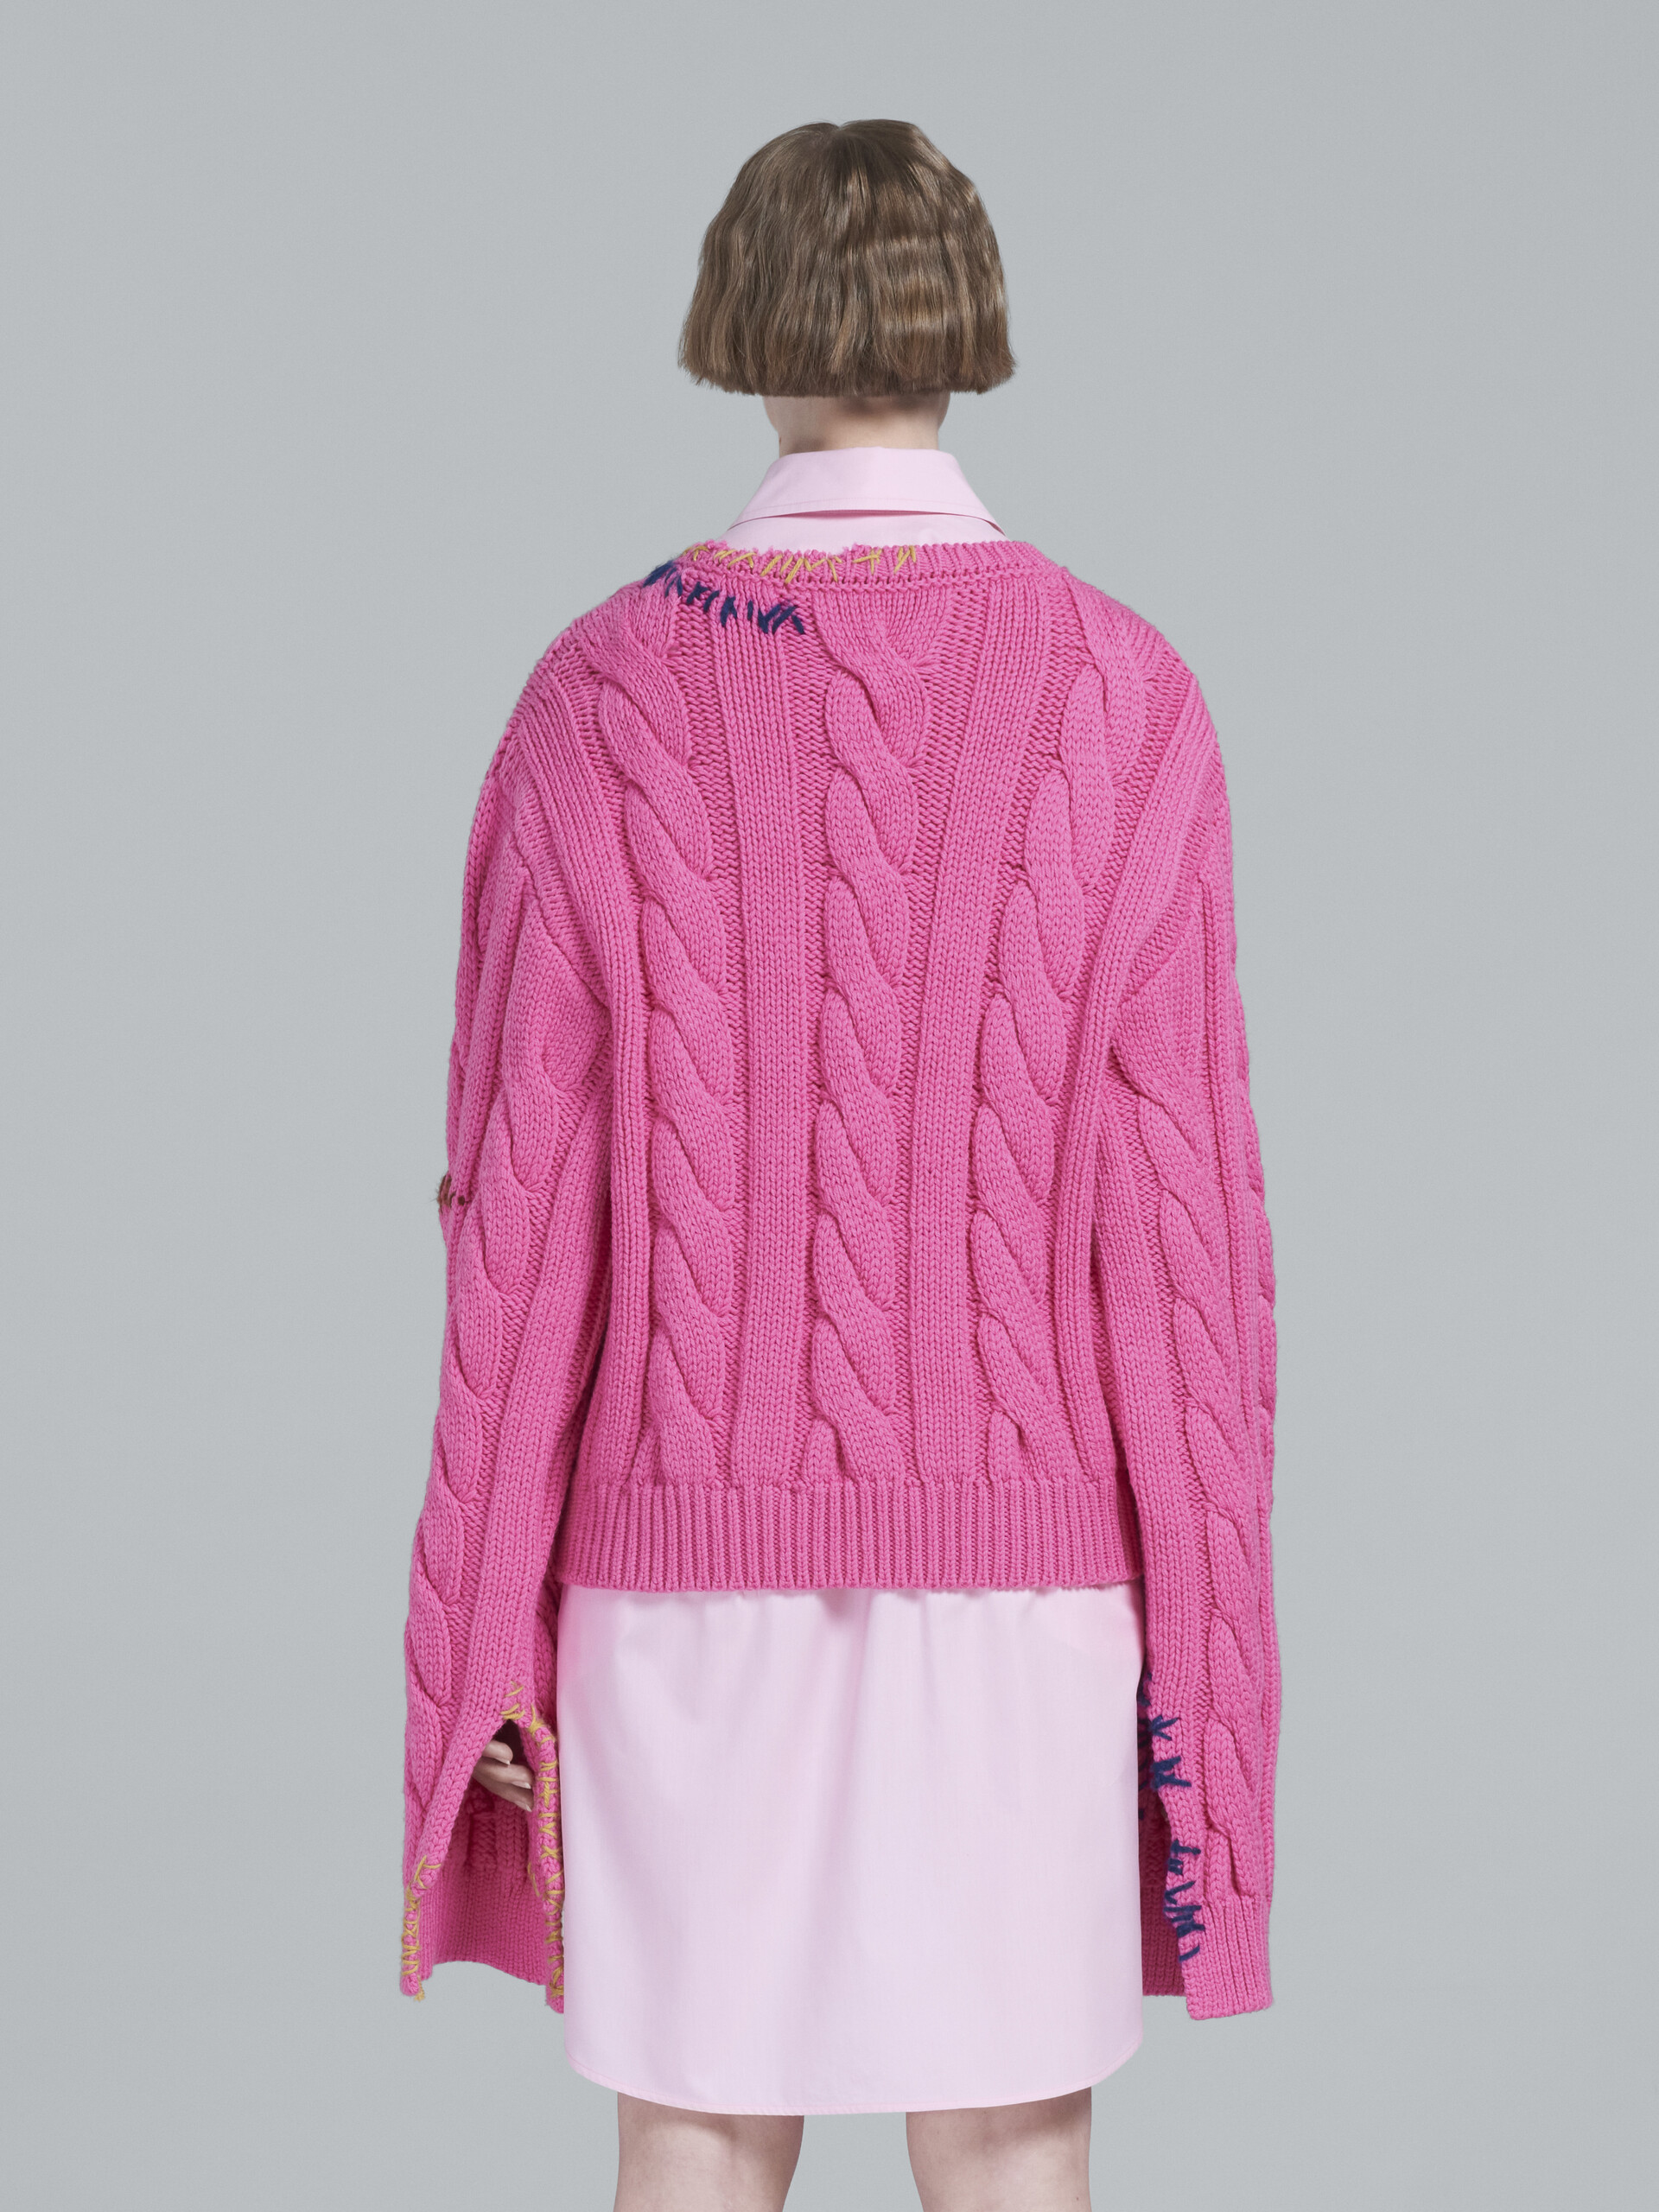 Fuchsia cable-knit sweater - Pullovers - Image 3